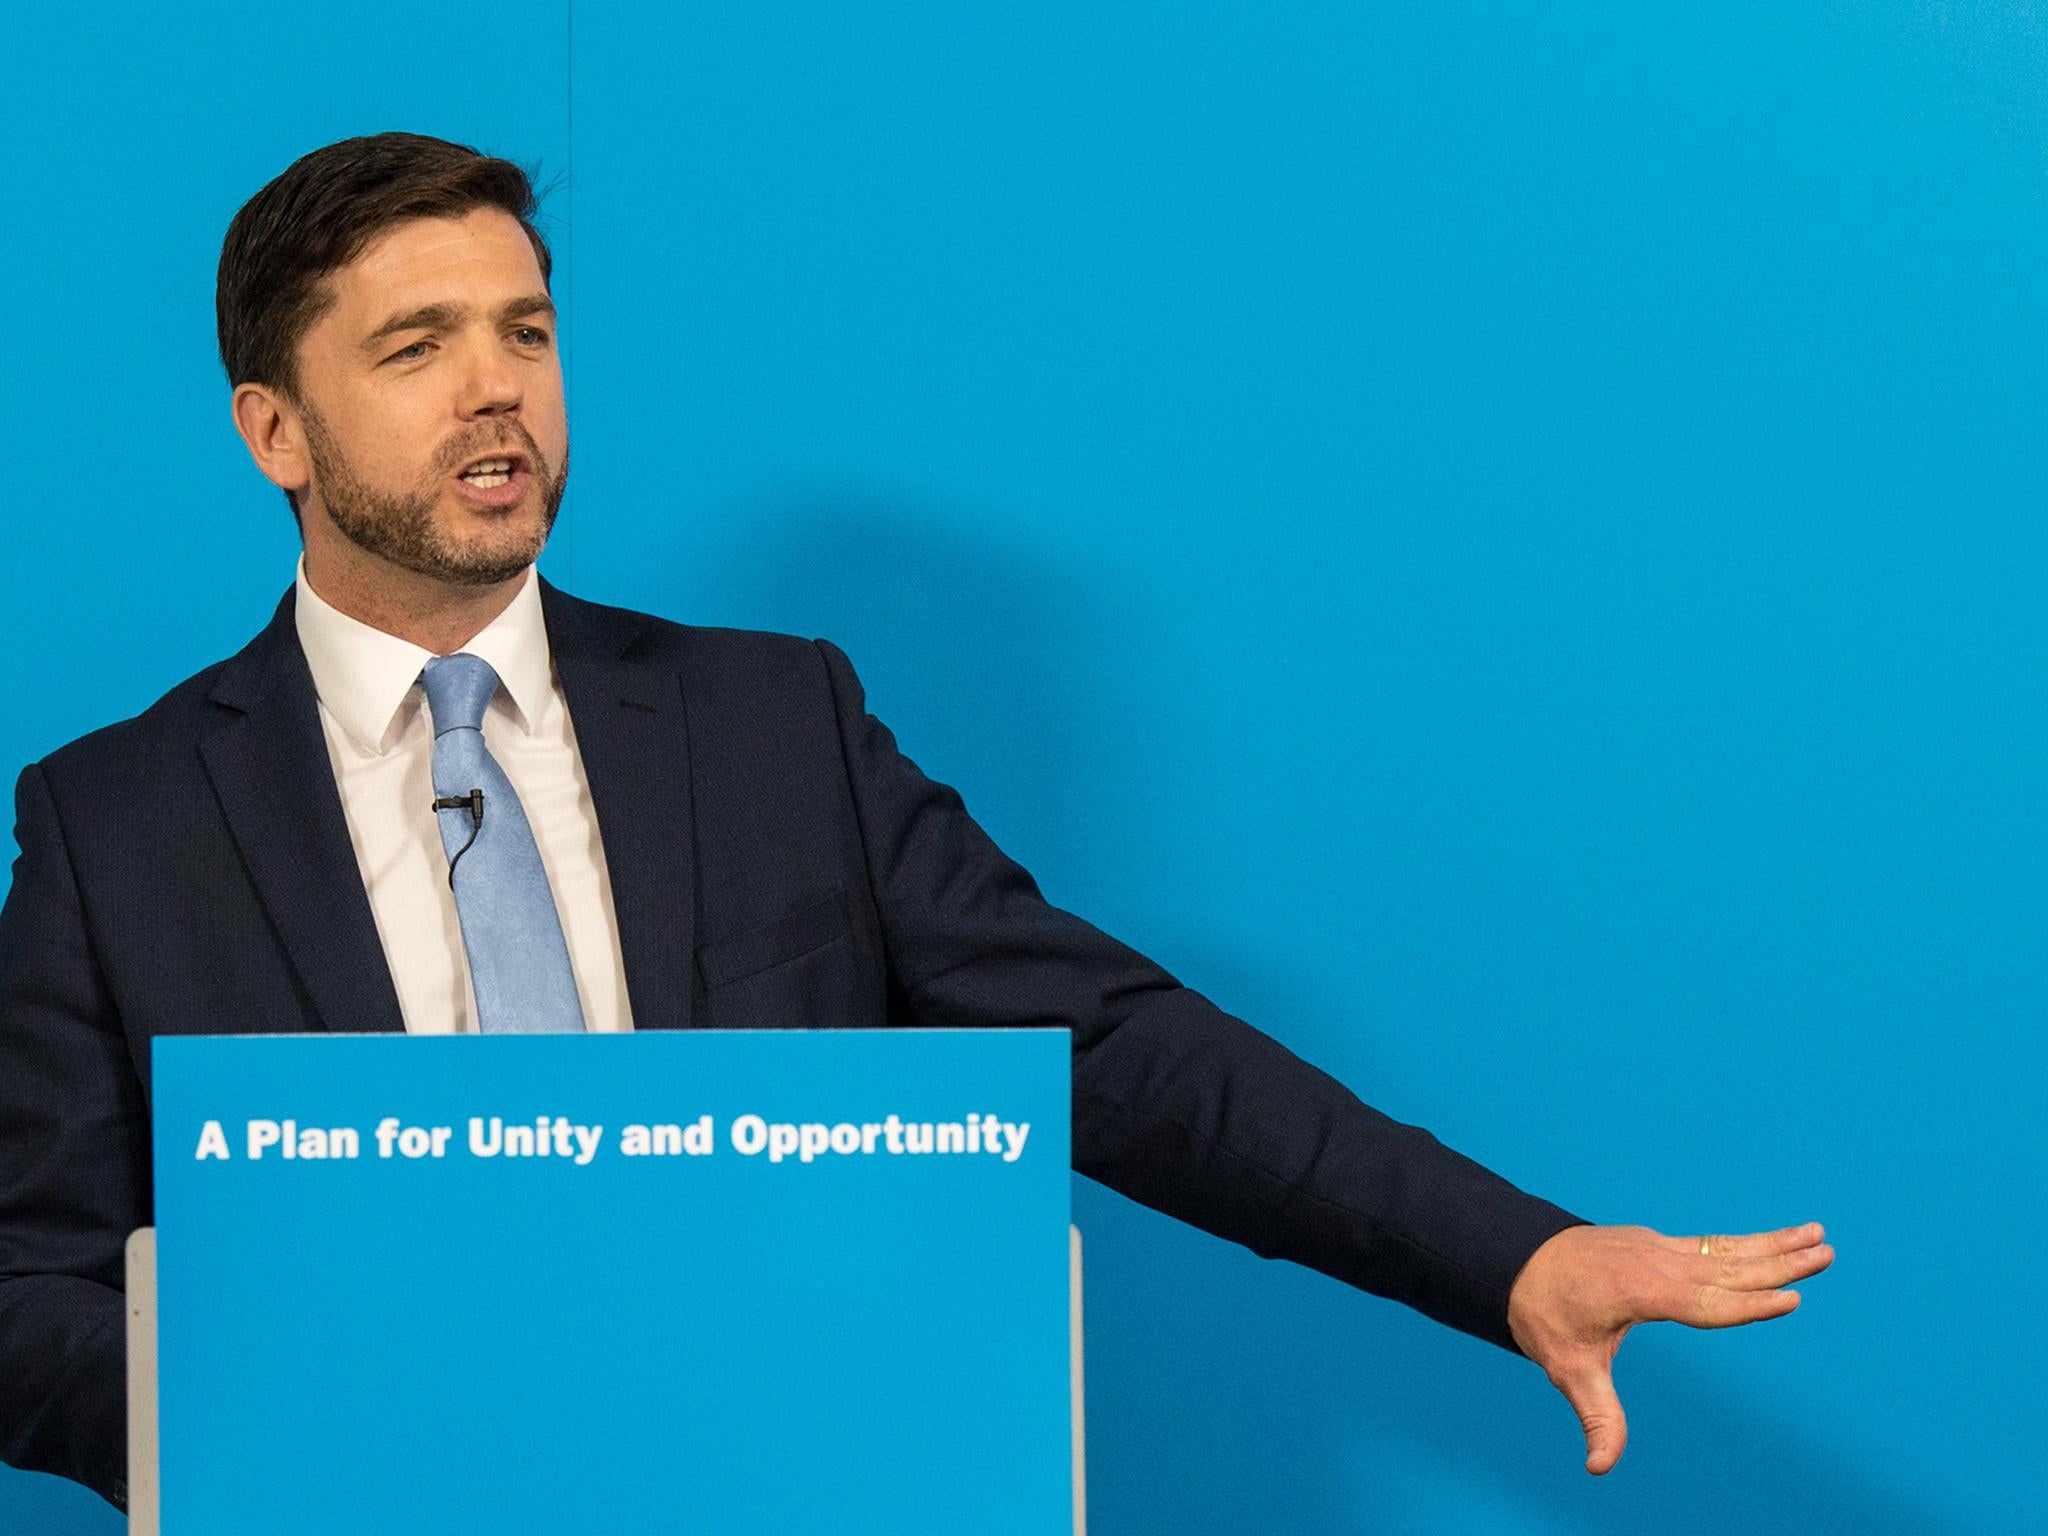 Crabb, 43, is the youngest contenders of five candidates currently in the race to succeed to David Cameron